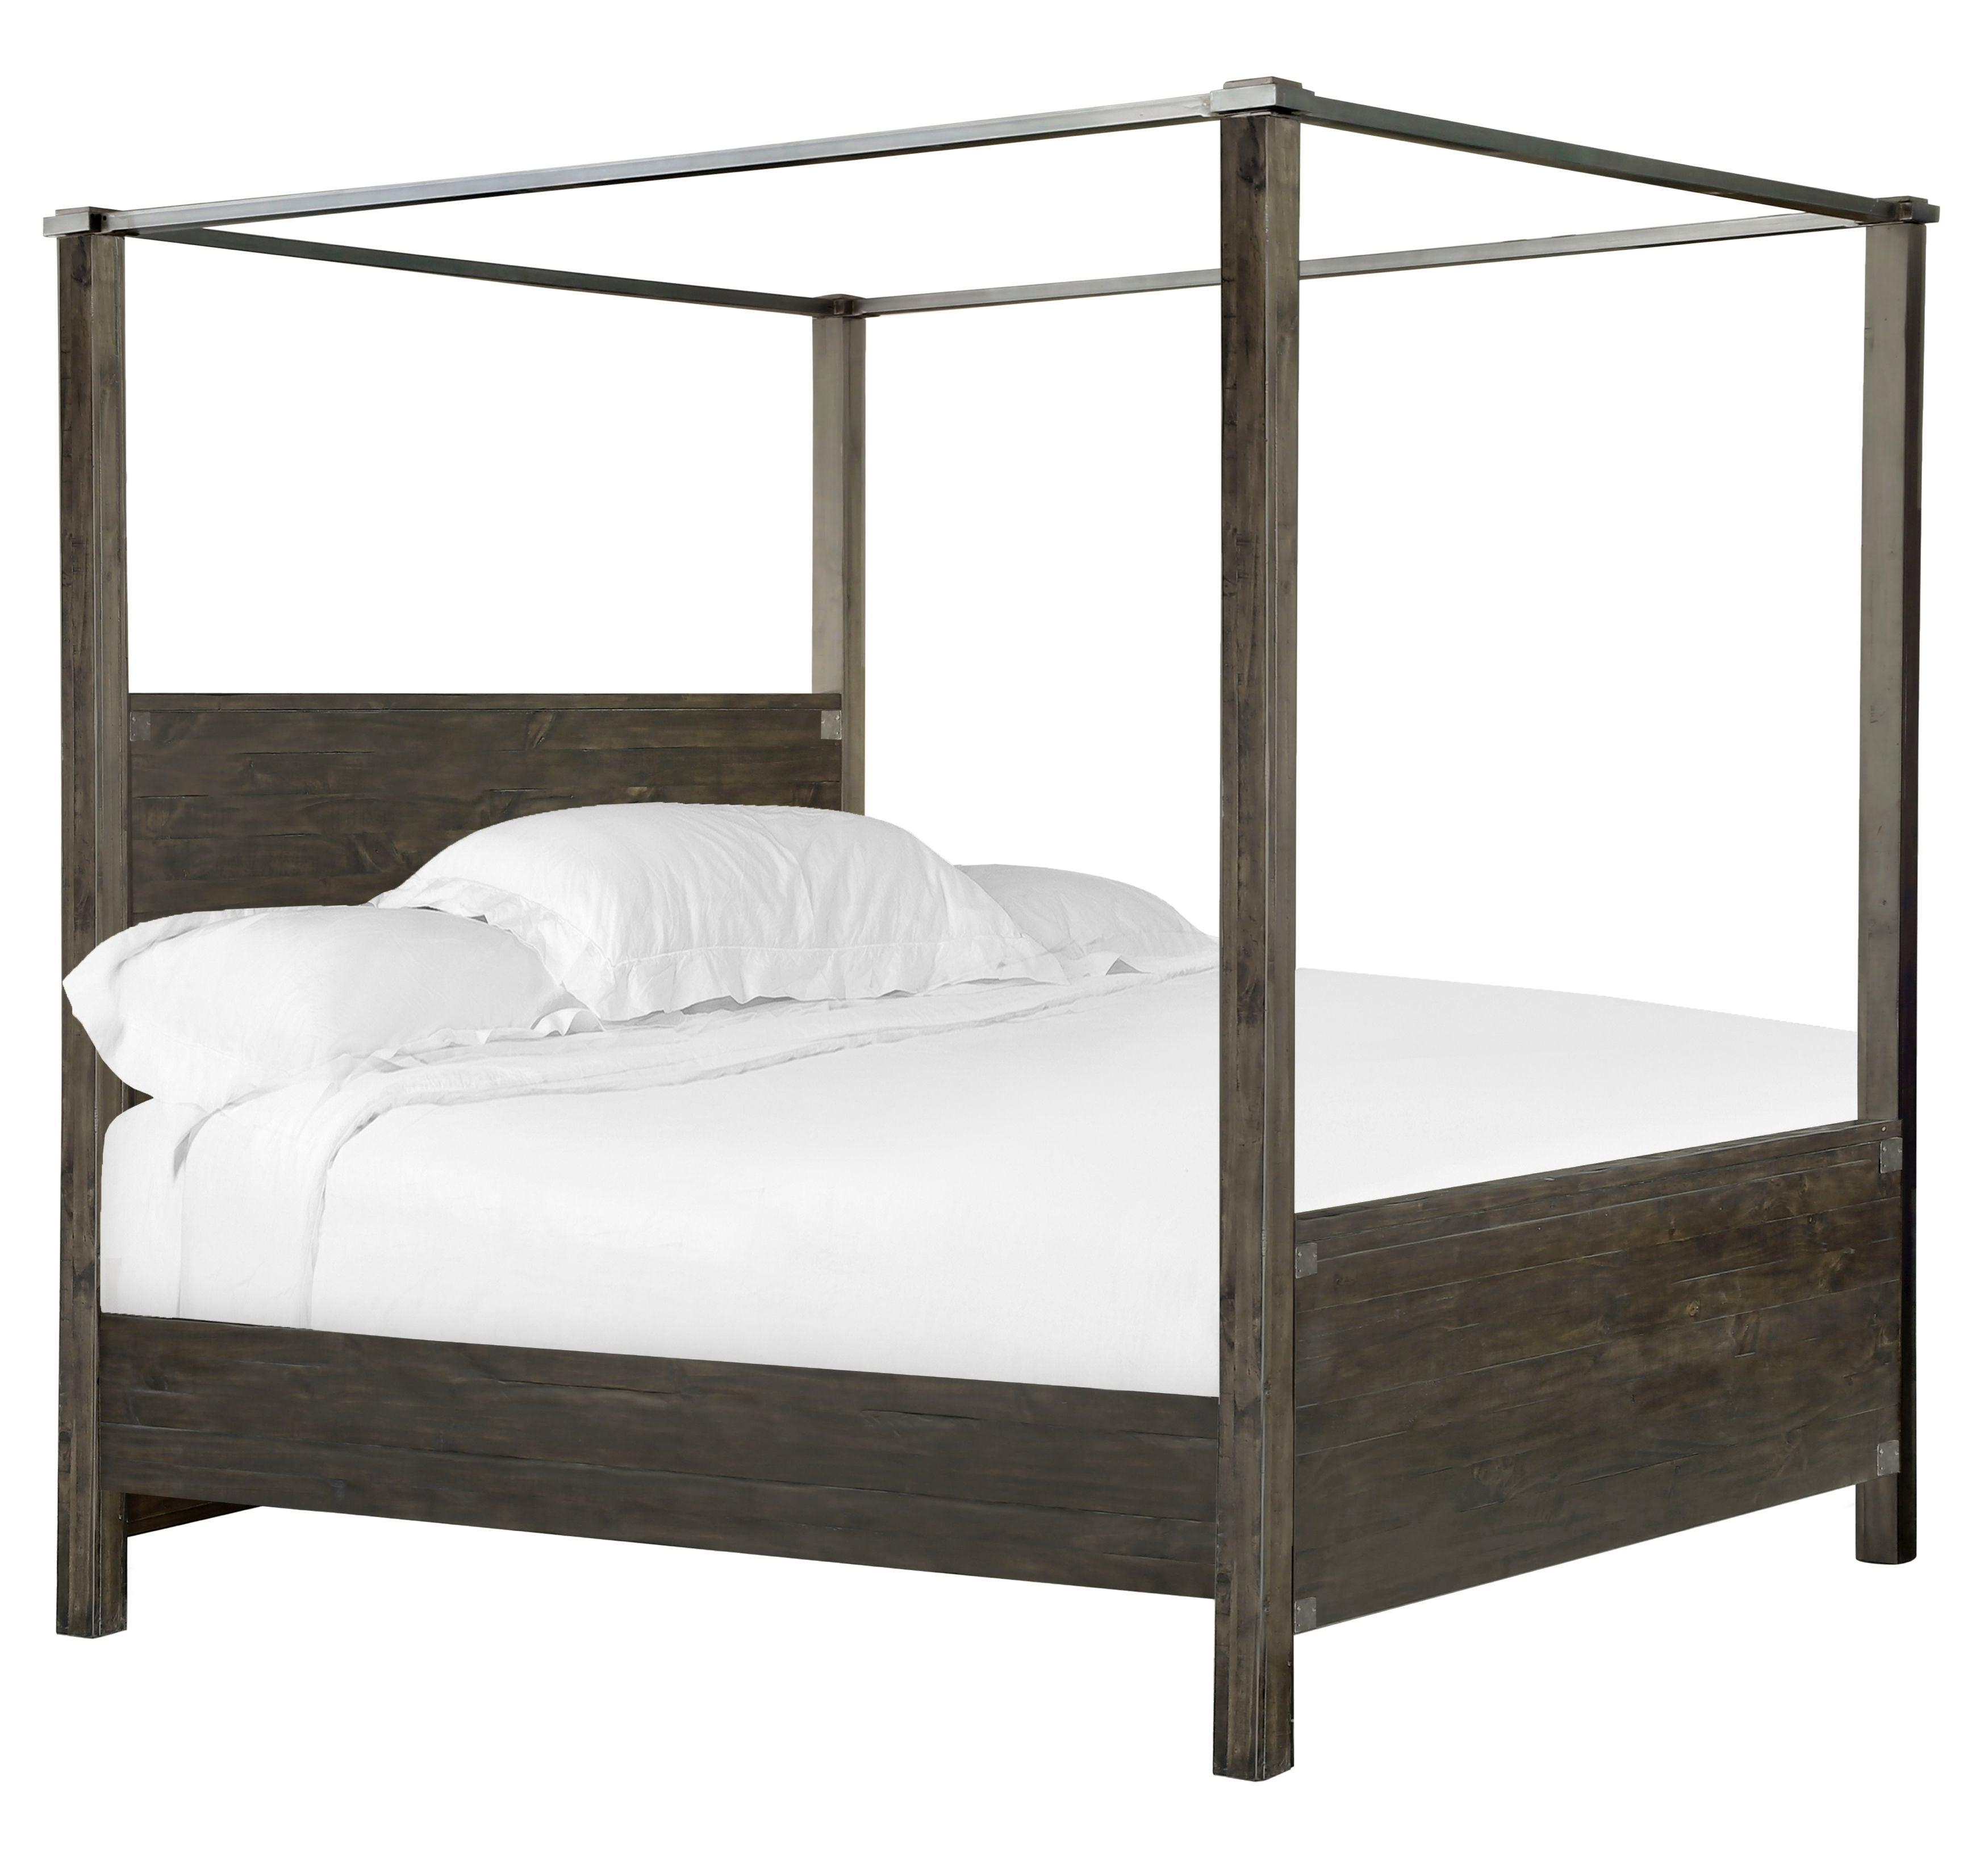 Magnussen Furniture - Abington - Queen / King Poster Bed Posts - Weathered Charcoal - 5th Avenue Furniture